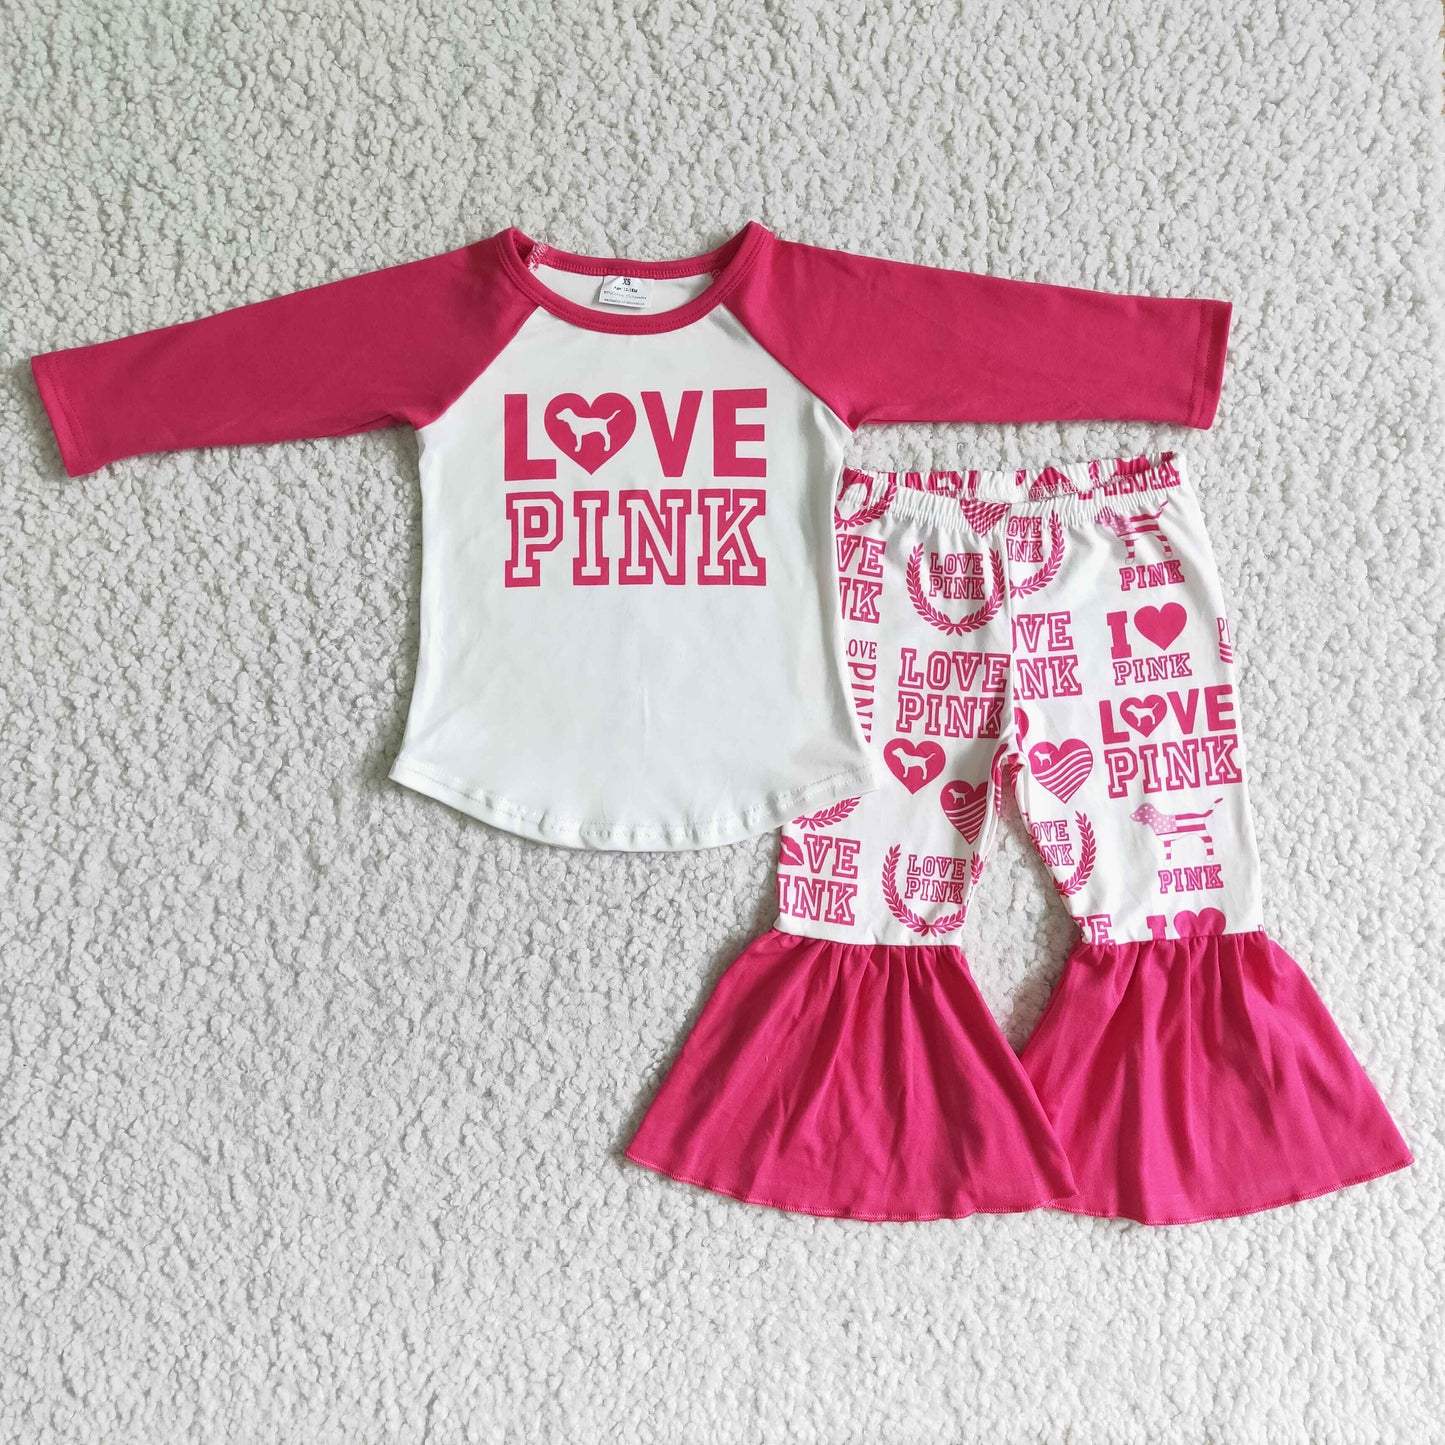 Love pink long sleeve girls outfits